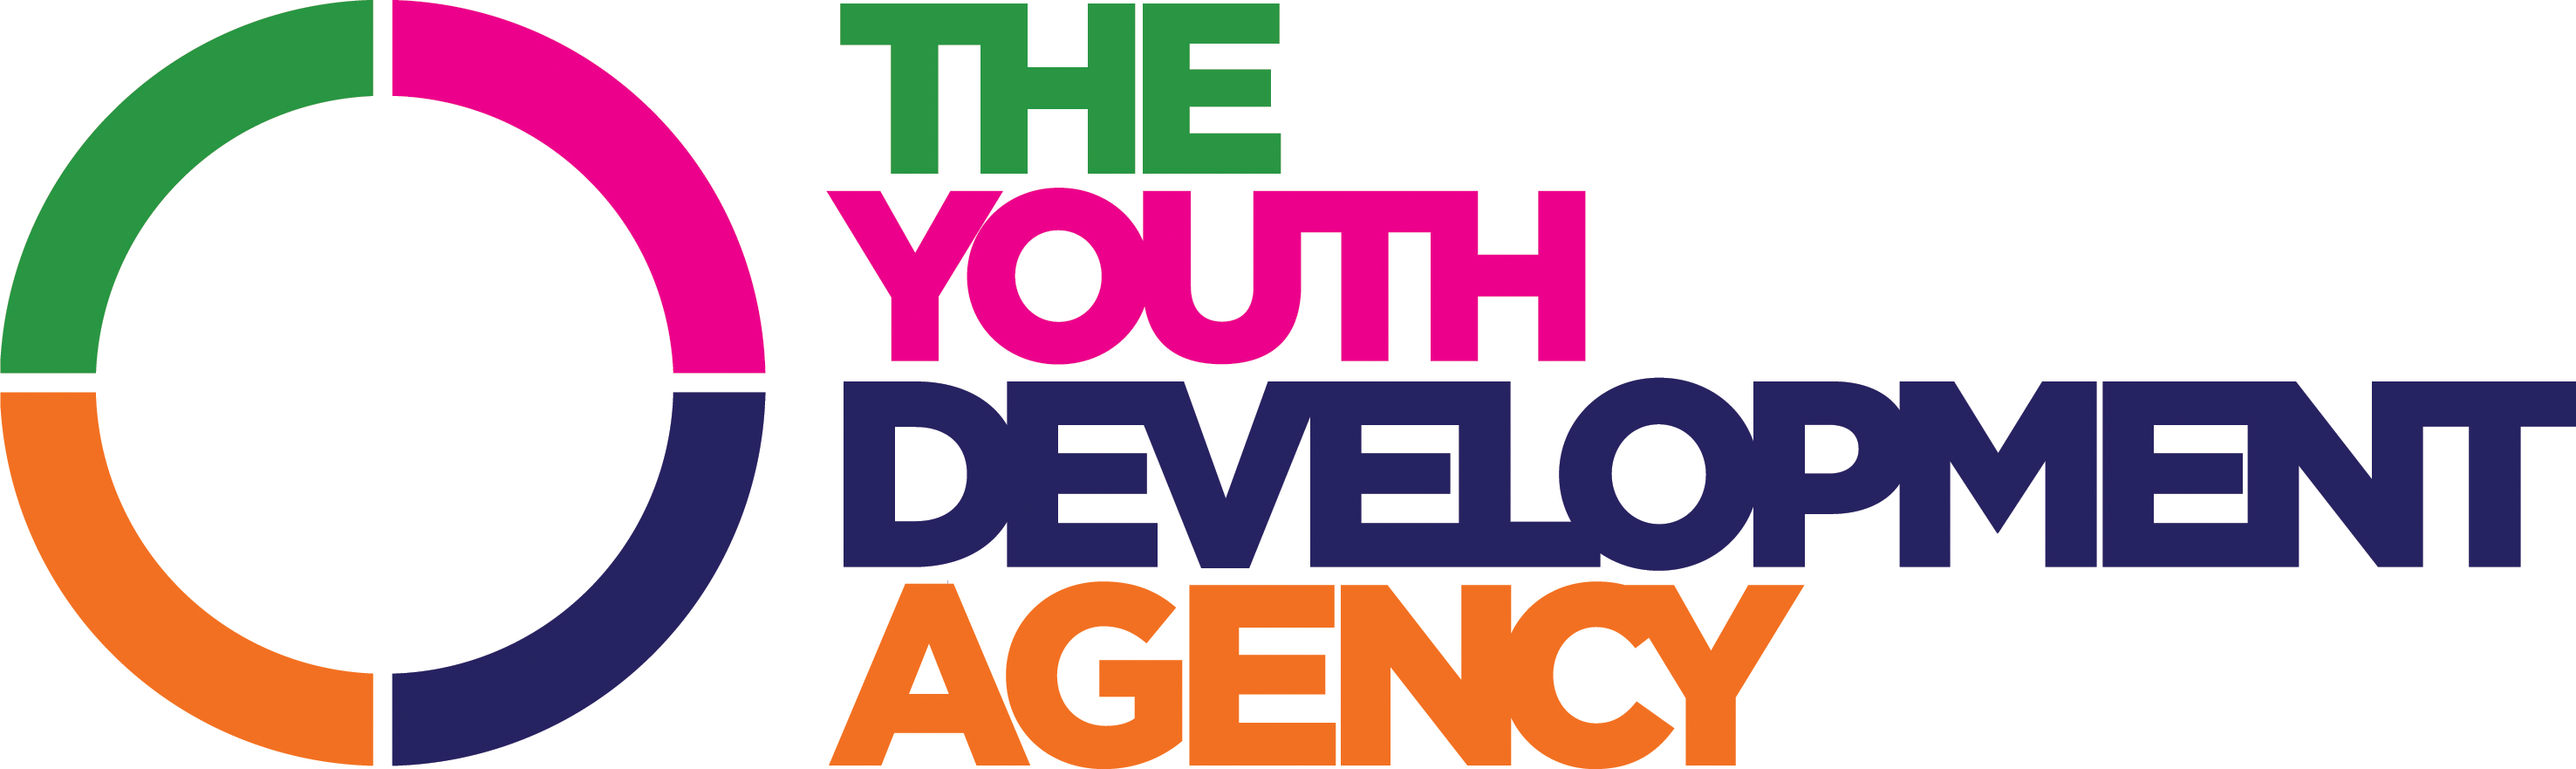 The Youth Development Agency